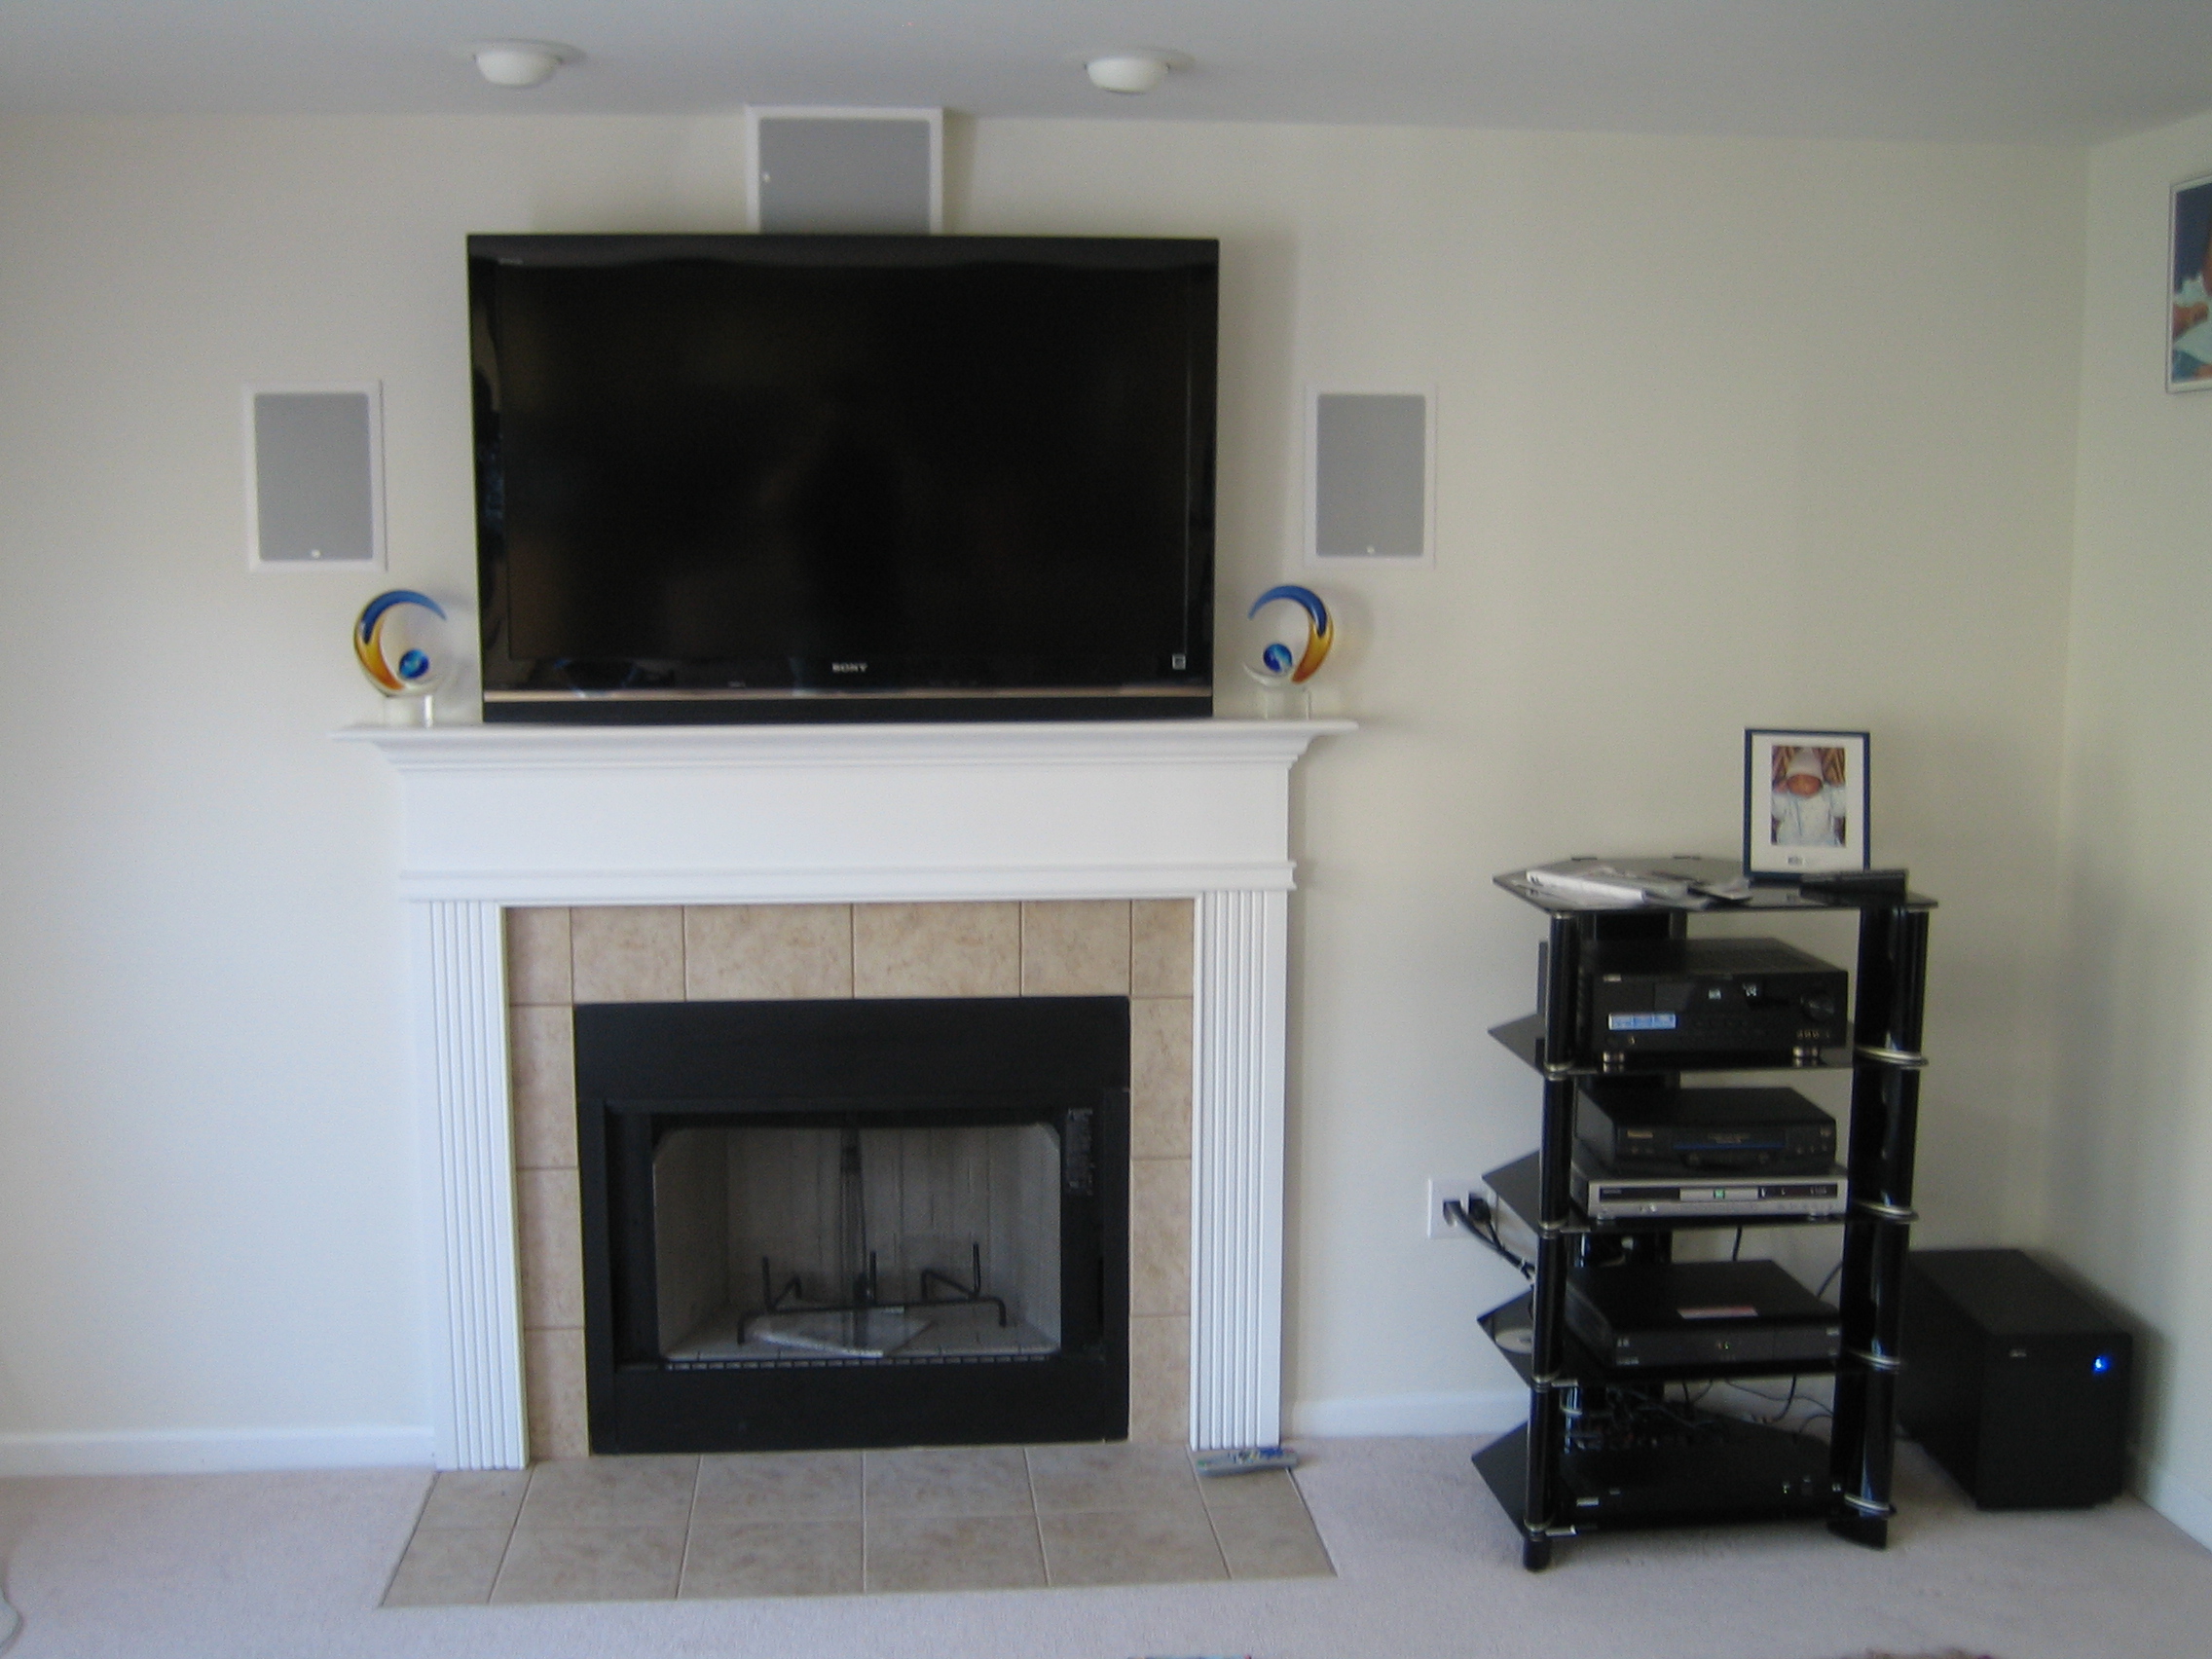 Hide Tv Wires Over Fireplace Elegant Hiding Wires for Wall Mounted Tv Over Fireplace &xs85